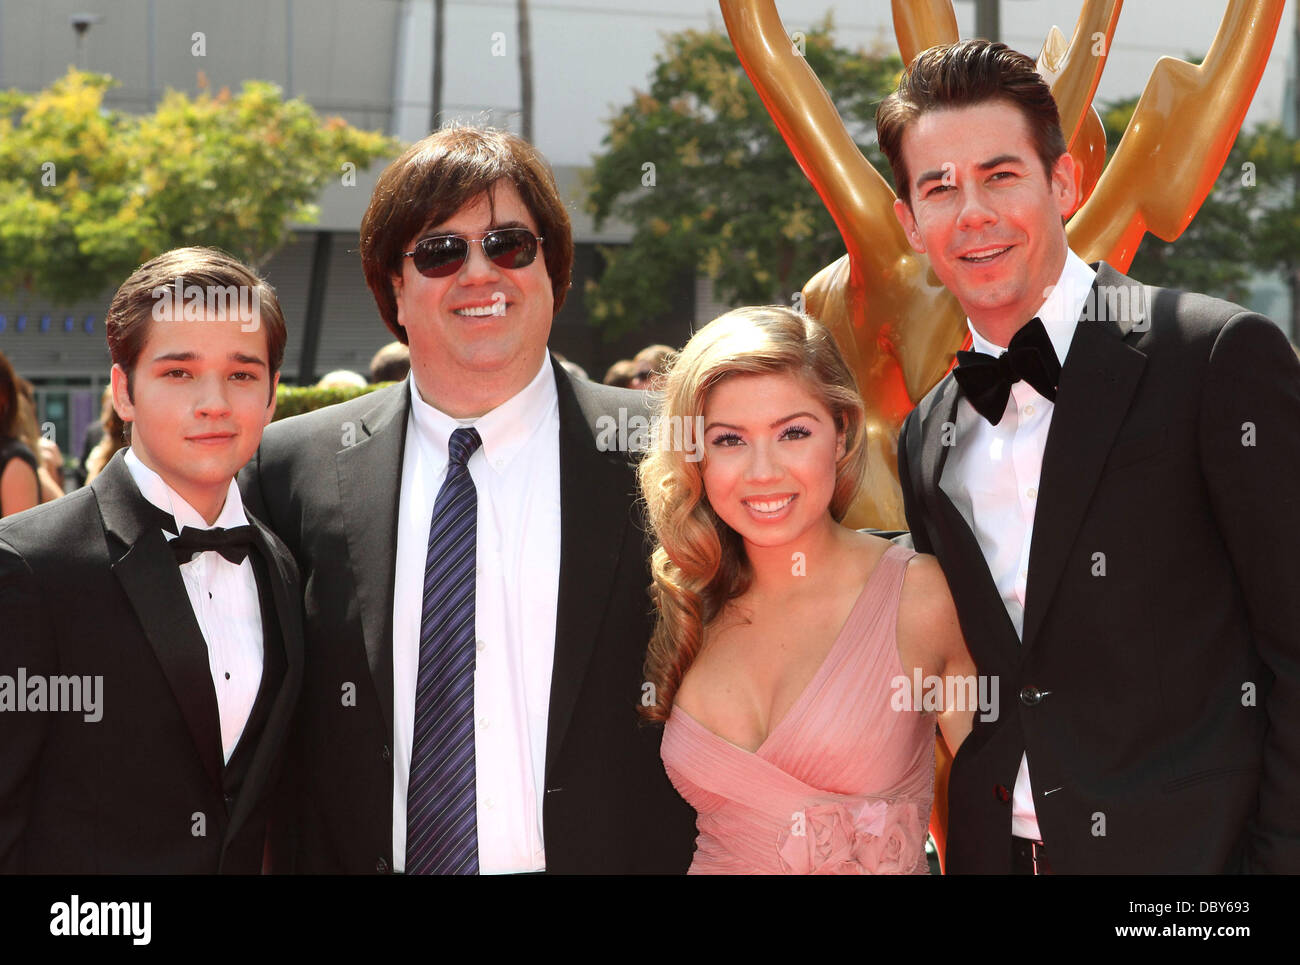 Nathan Kress, Jennette McCurdy, Jerry Trainor 2011 Primetime Creative Arts Emmy Awards Held at The Nokia Theatre L.A. Live Los Angeles, California - 10.09.11 Stock Photo